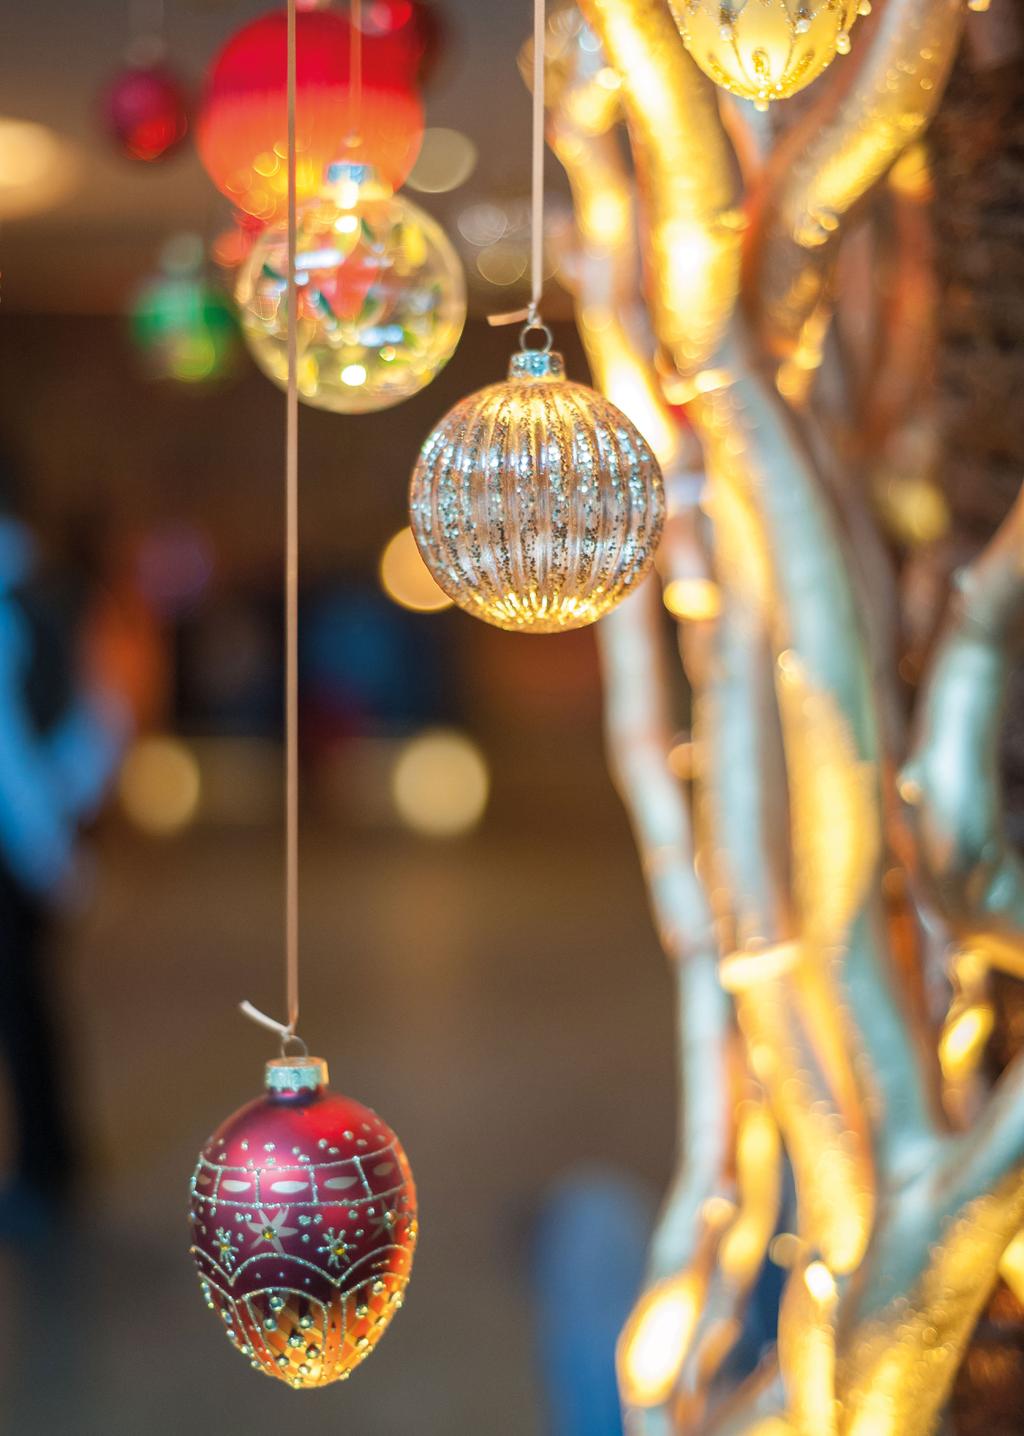 Contact our Christmas team Come together with Hilton FESTIVE Party Nights We have the perfect party night for you to enjoy a festive celebration with colleagues, friends and family.